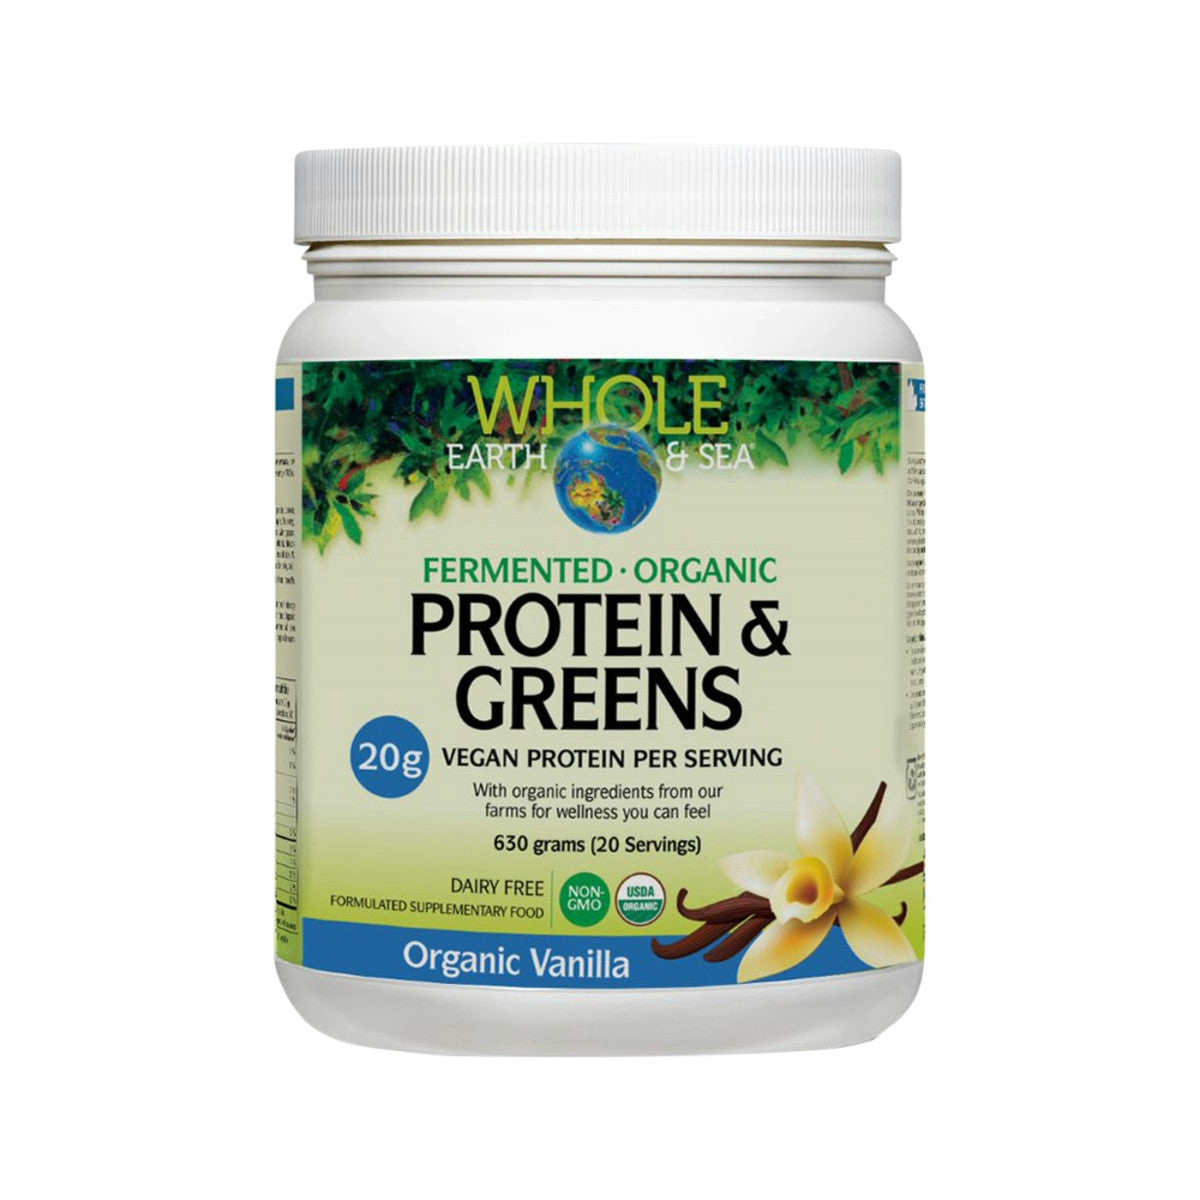 image of Whole Earth & Sea Protein & Greens Organic Vanilla 630g on white background 